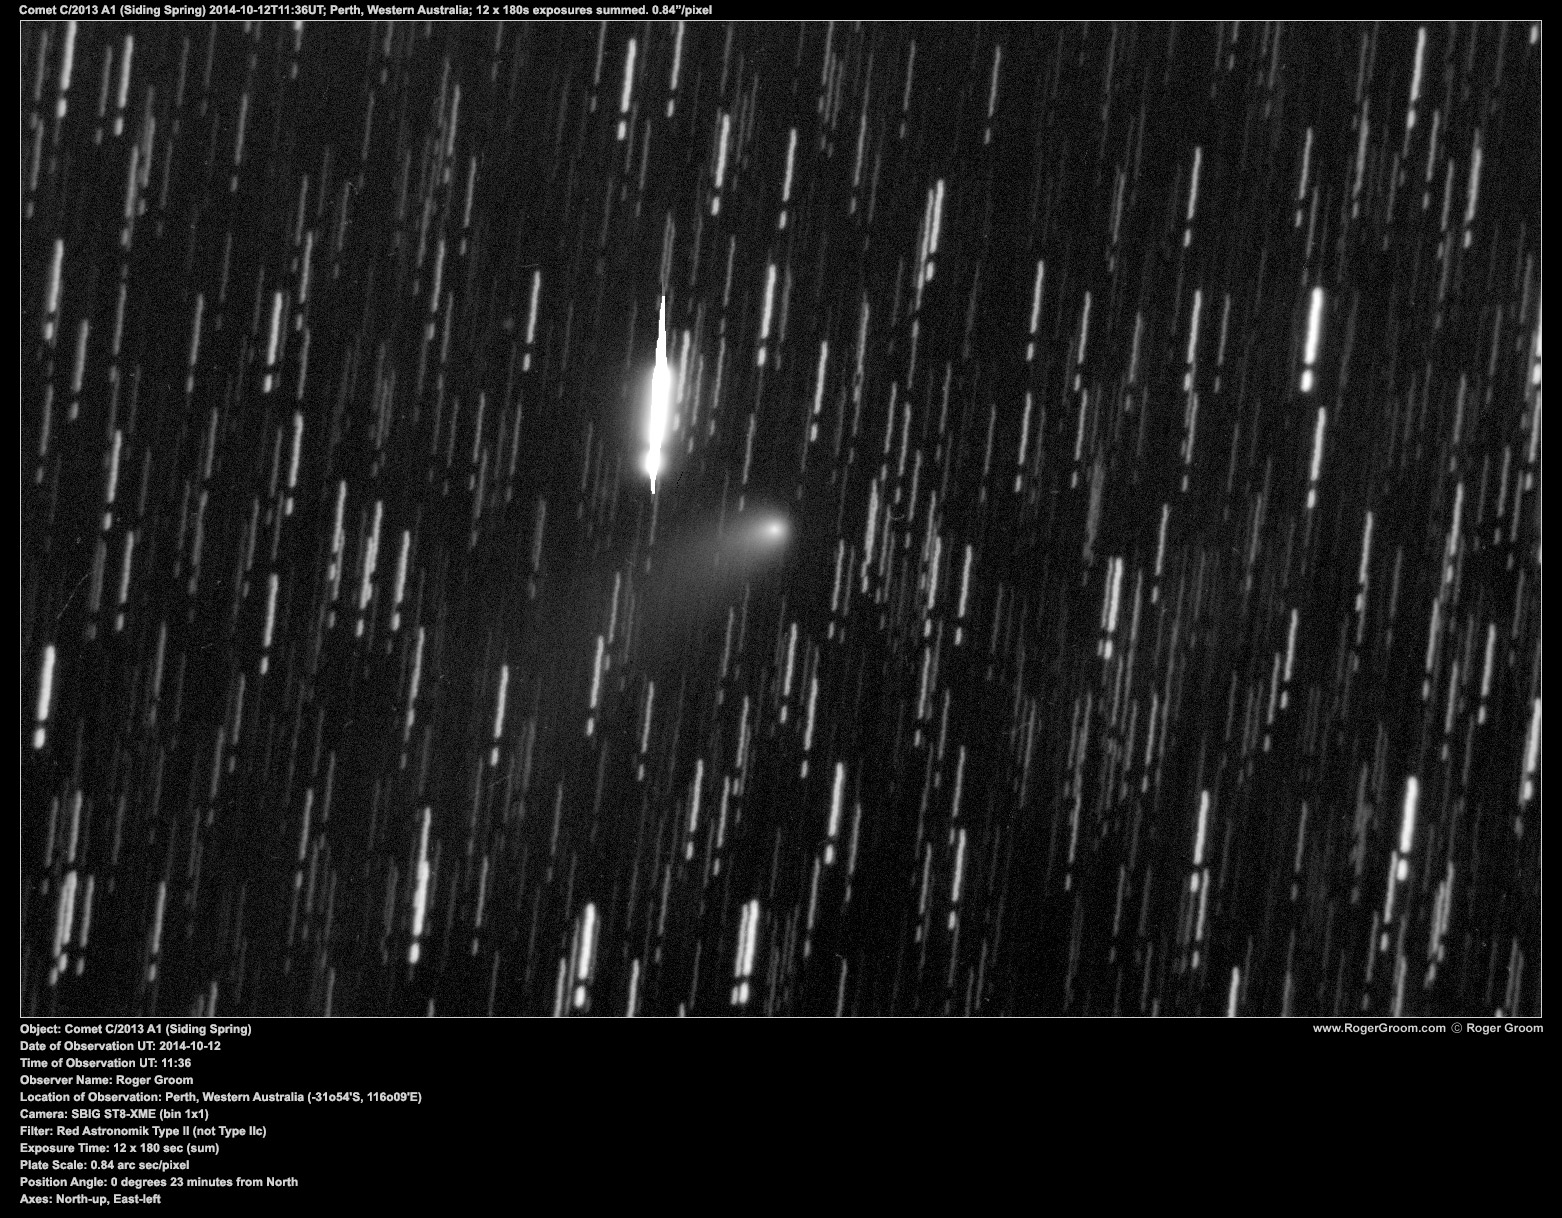 Object: Comet C/2013 A1 (Siding Spring) Date of Observation UT: 2014-10-12 Time of Observation UT: 11:36 Observer Name: Roger Groom Location of Observation: Perth, Western Australia (-31o54'S, 116o09'E) Camera: SBIG ST8-XME (bin 1x1) Filter: Red Astronomik Type II (not Type IIc) Exposure Time: 12 x 180 sec (sum) Plate Scale: 0.84 arc sec/pixel Position Angle: 0 degrees 23 minutes from North Axes: North-up, East-left